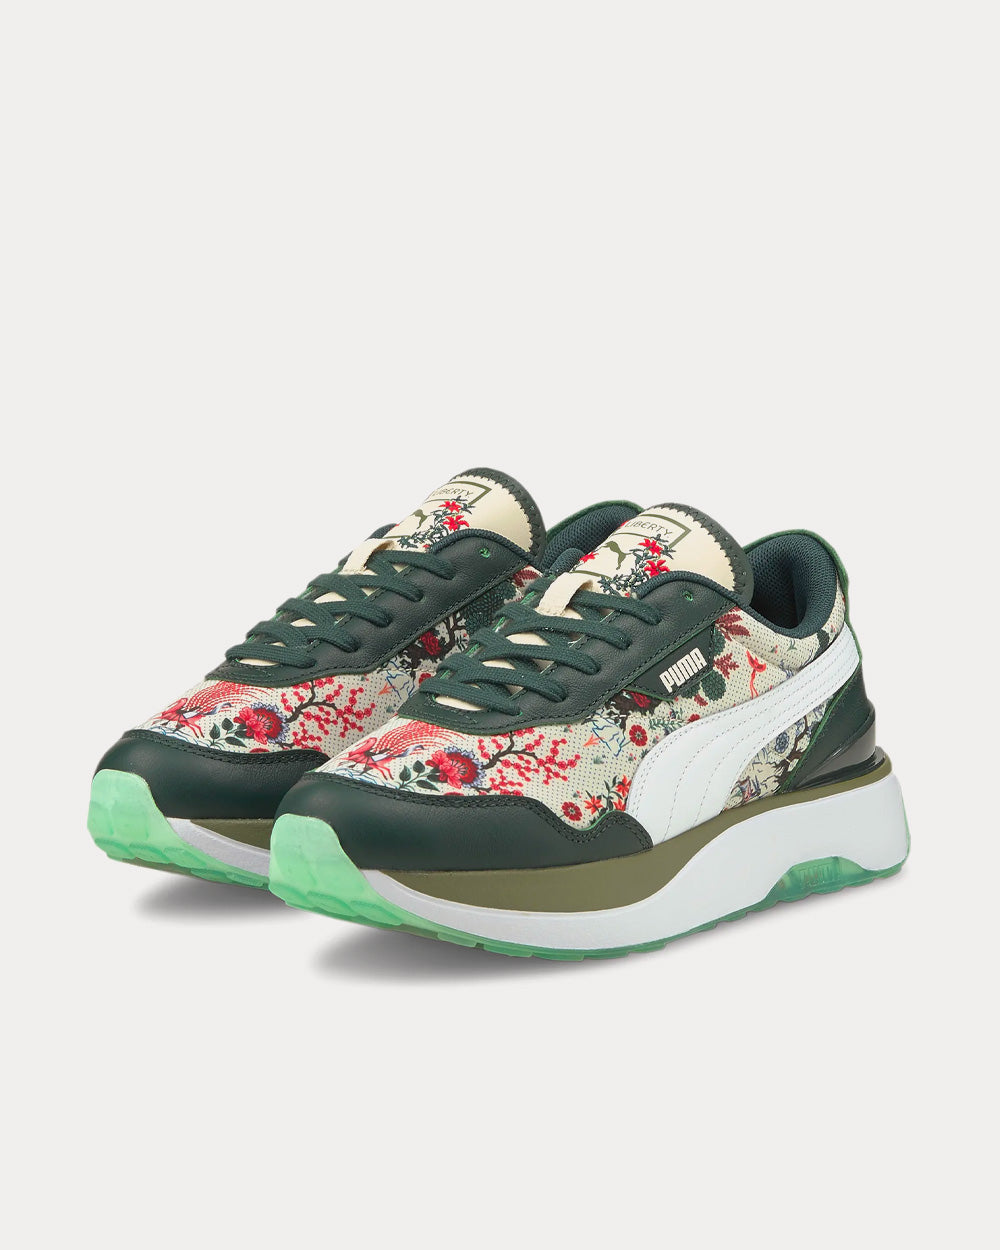 Puma x Liberty - Cruise Rider NU Green Gables / Puma White Low Top Sneakers